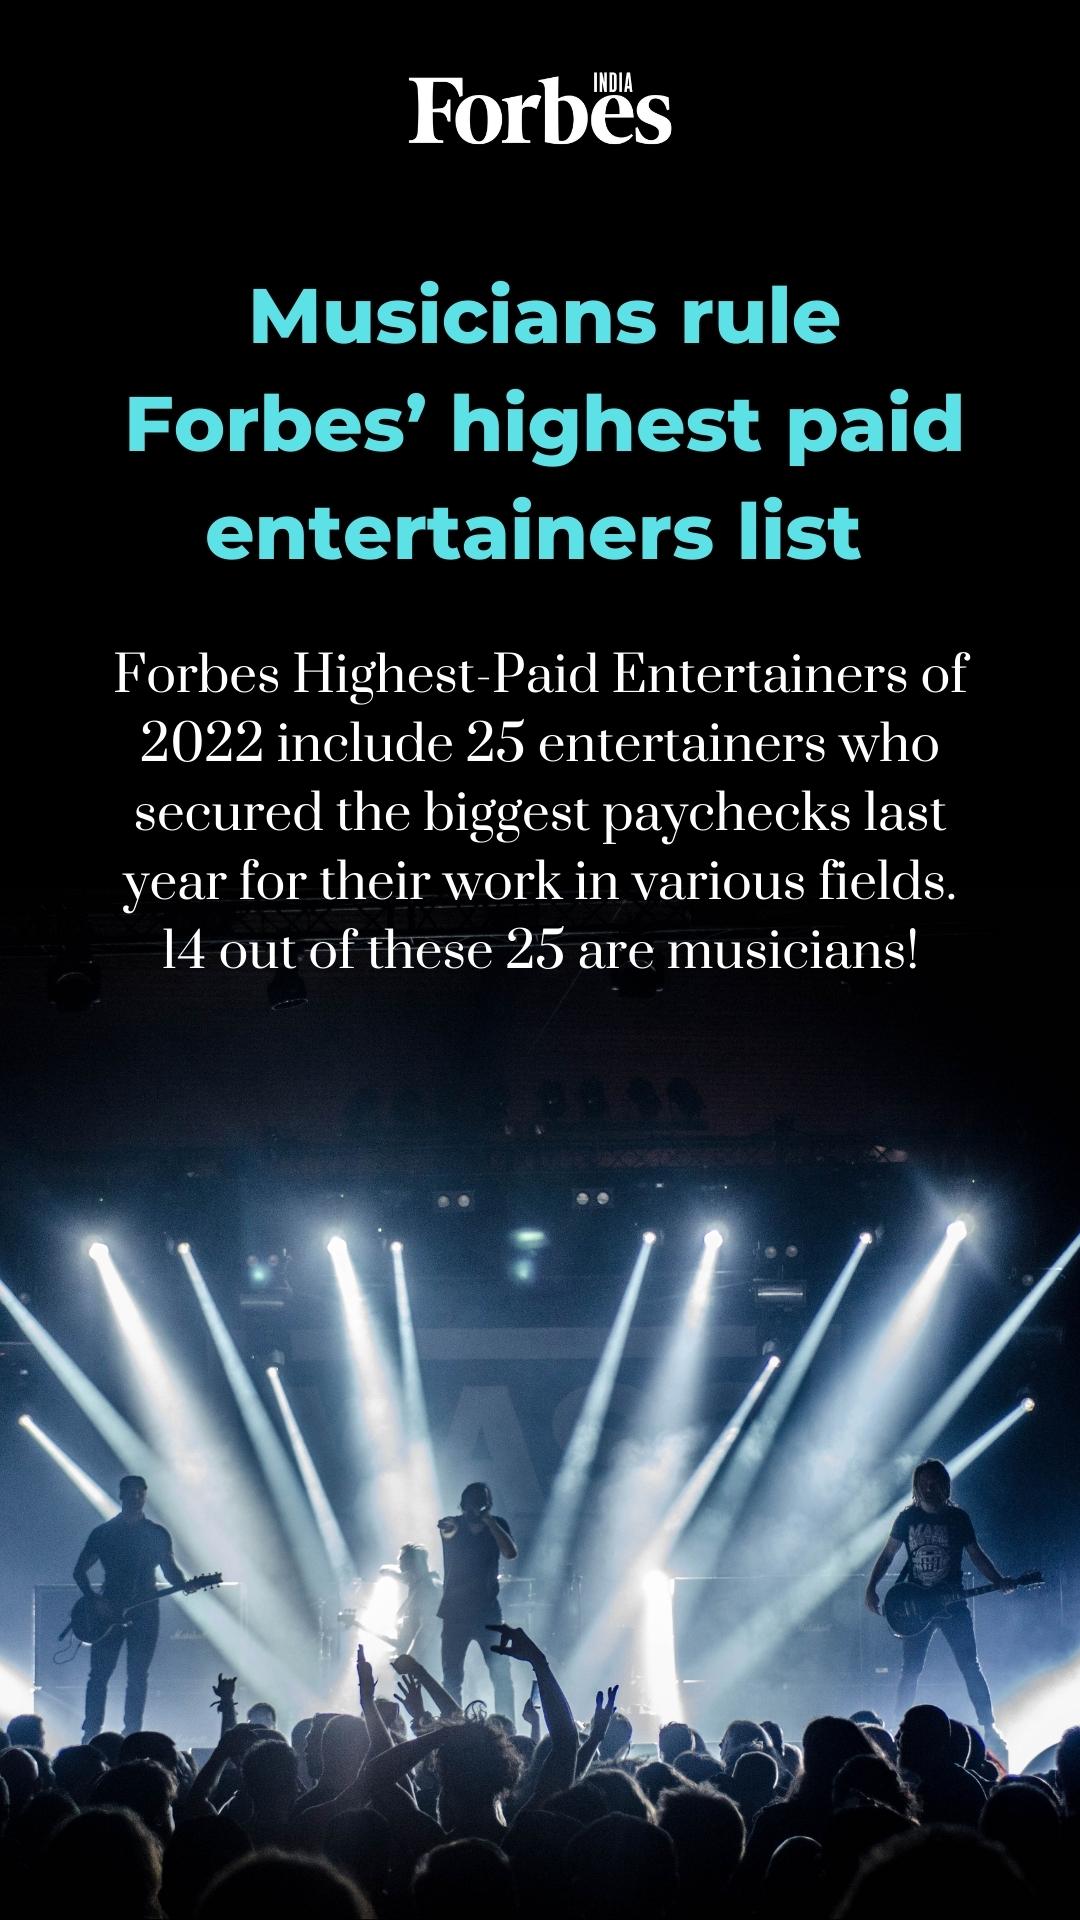 Taylor Swift, Jay-Z, Kanye West, Bruce Springsteen, and more—musicians rule Forbes' list of highest-paid entertainers of 2022